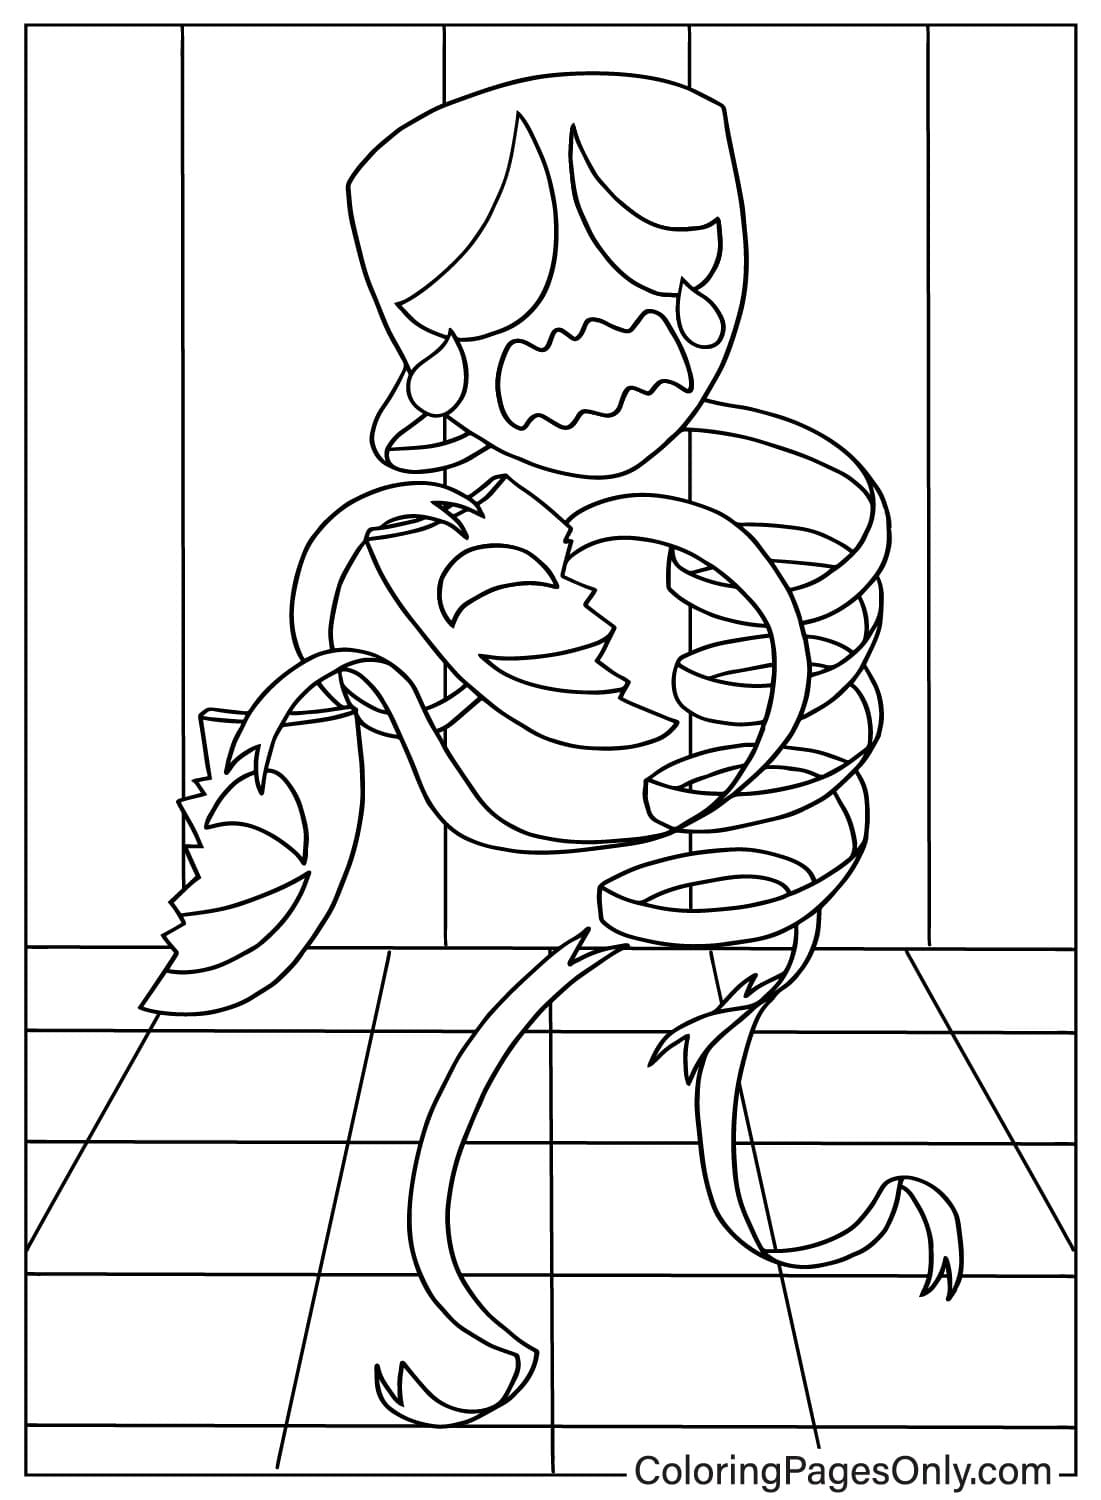 Gangle Free Coloring Page from Gangle